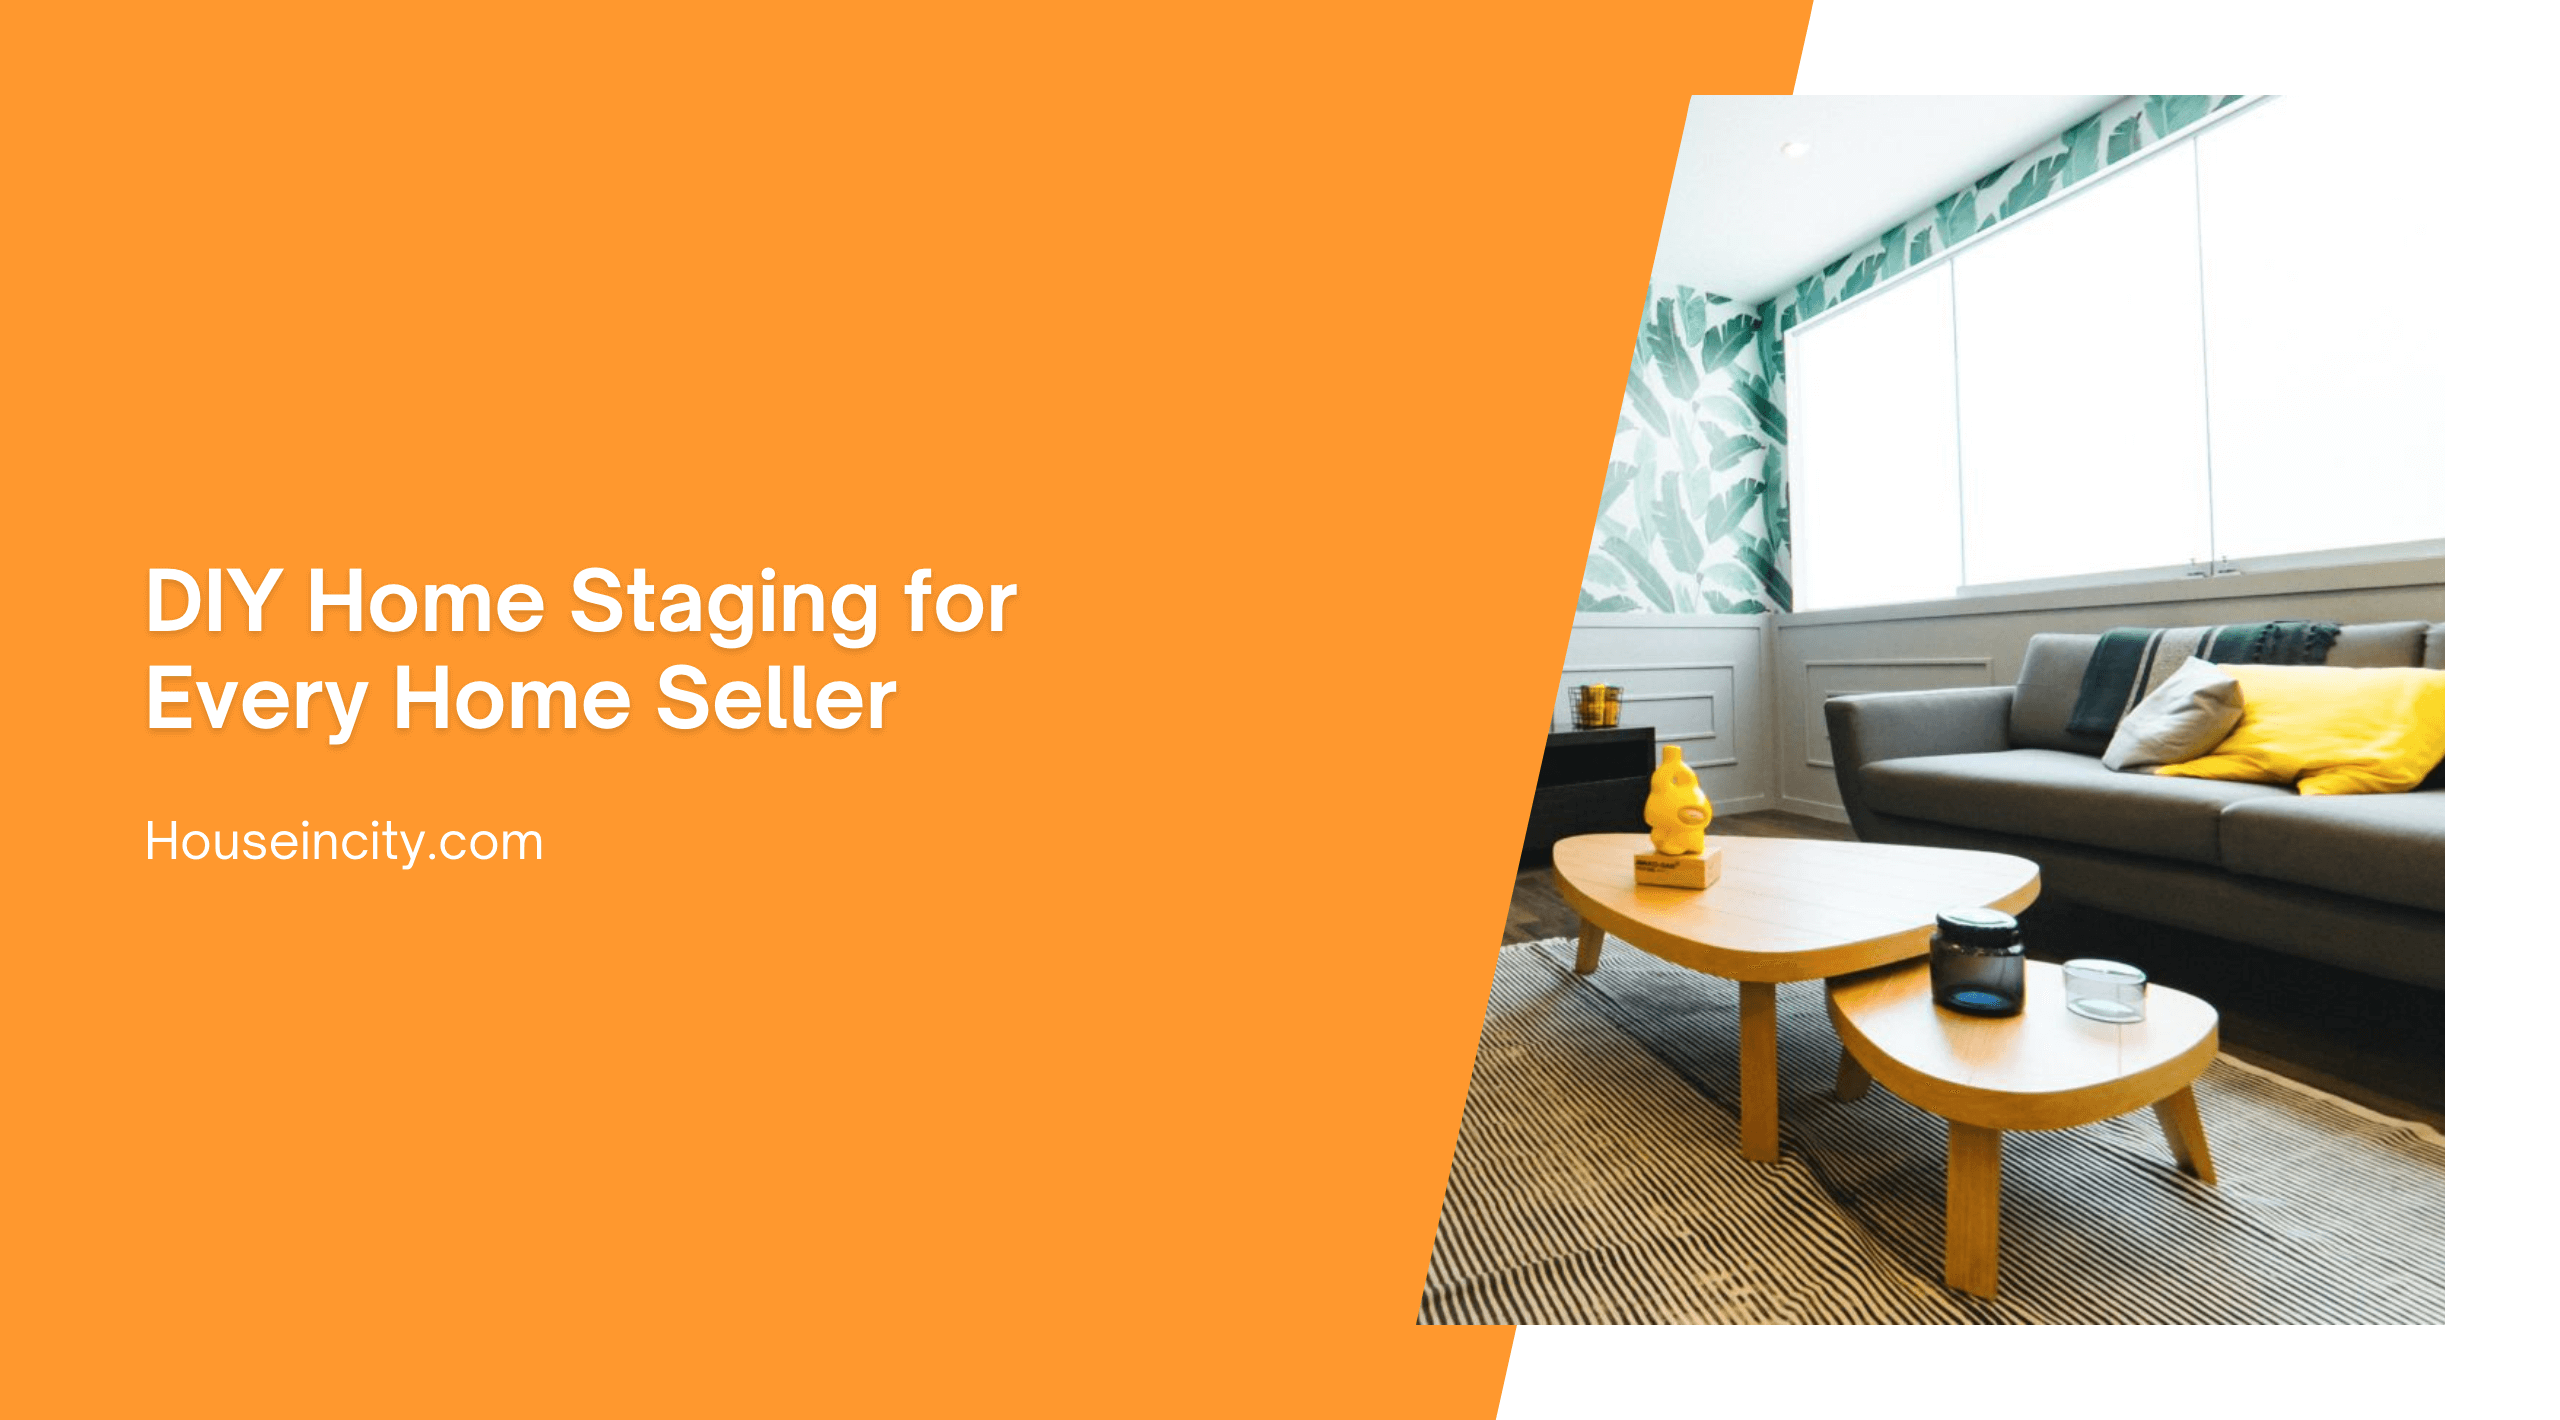 DIY Home Staging for Every Home Seller